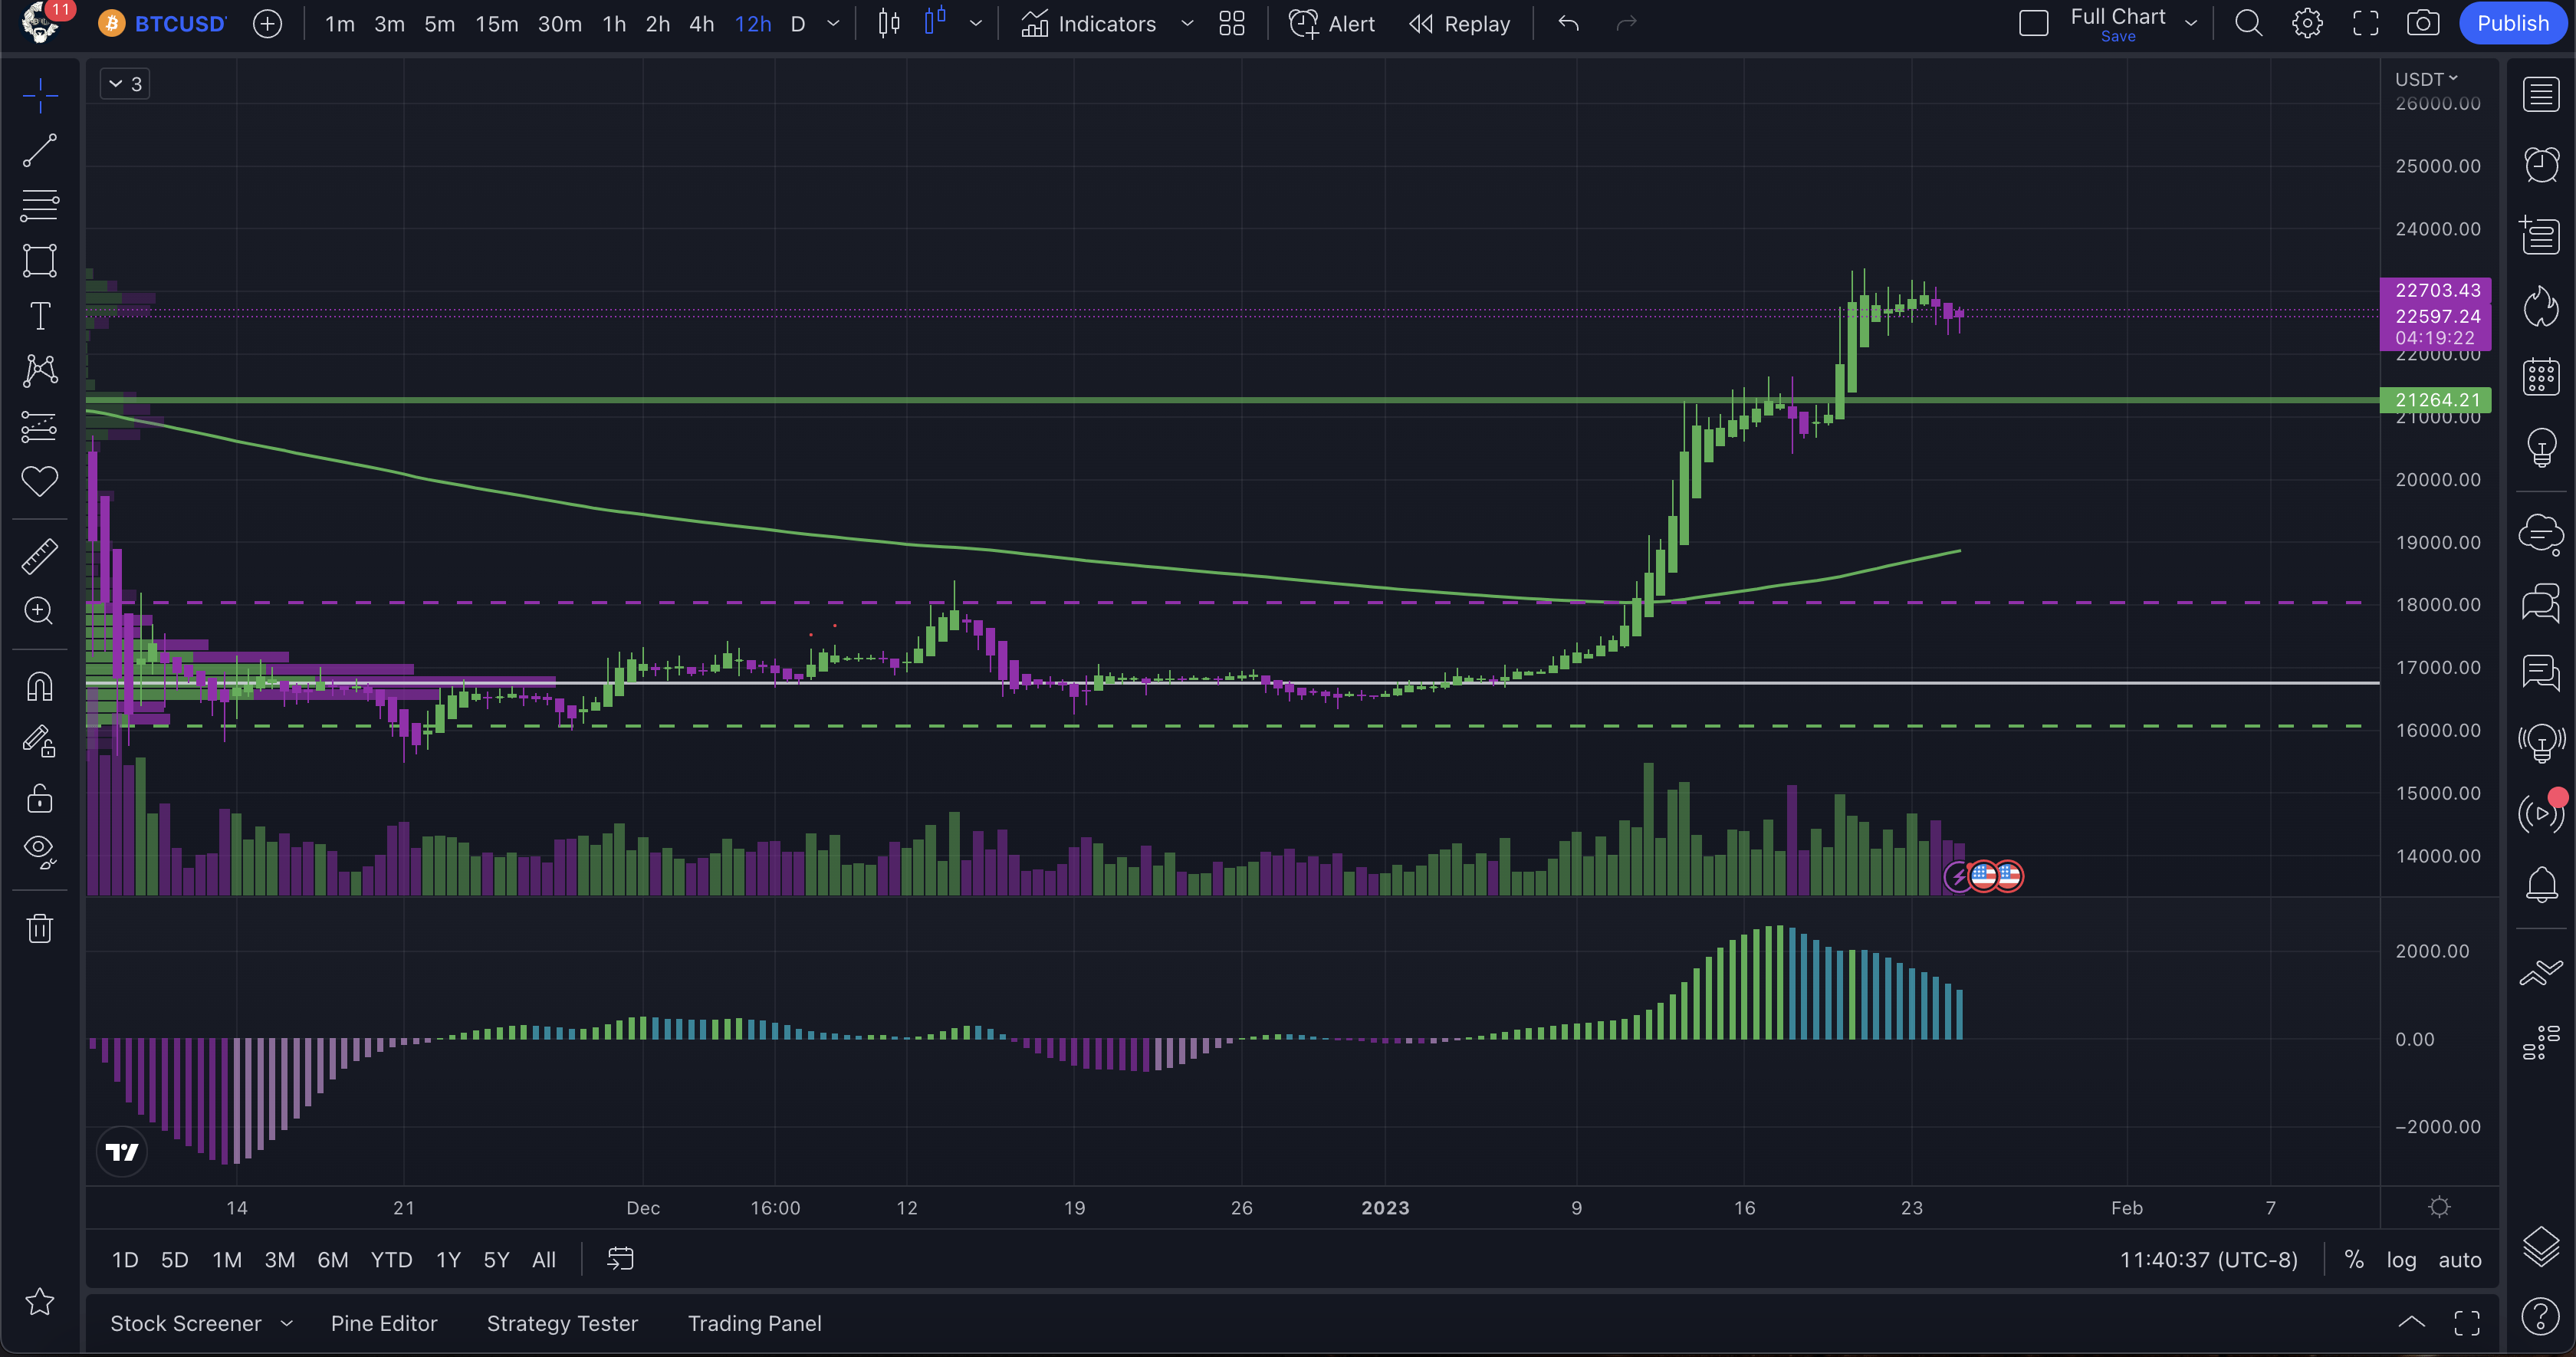 Bitcoin Keeps Grinding Along 12 hour chart support resistance moving average squeeze indicator